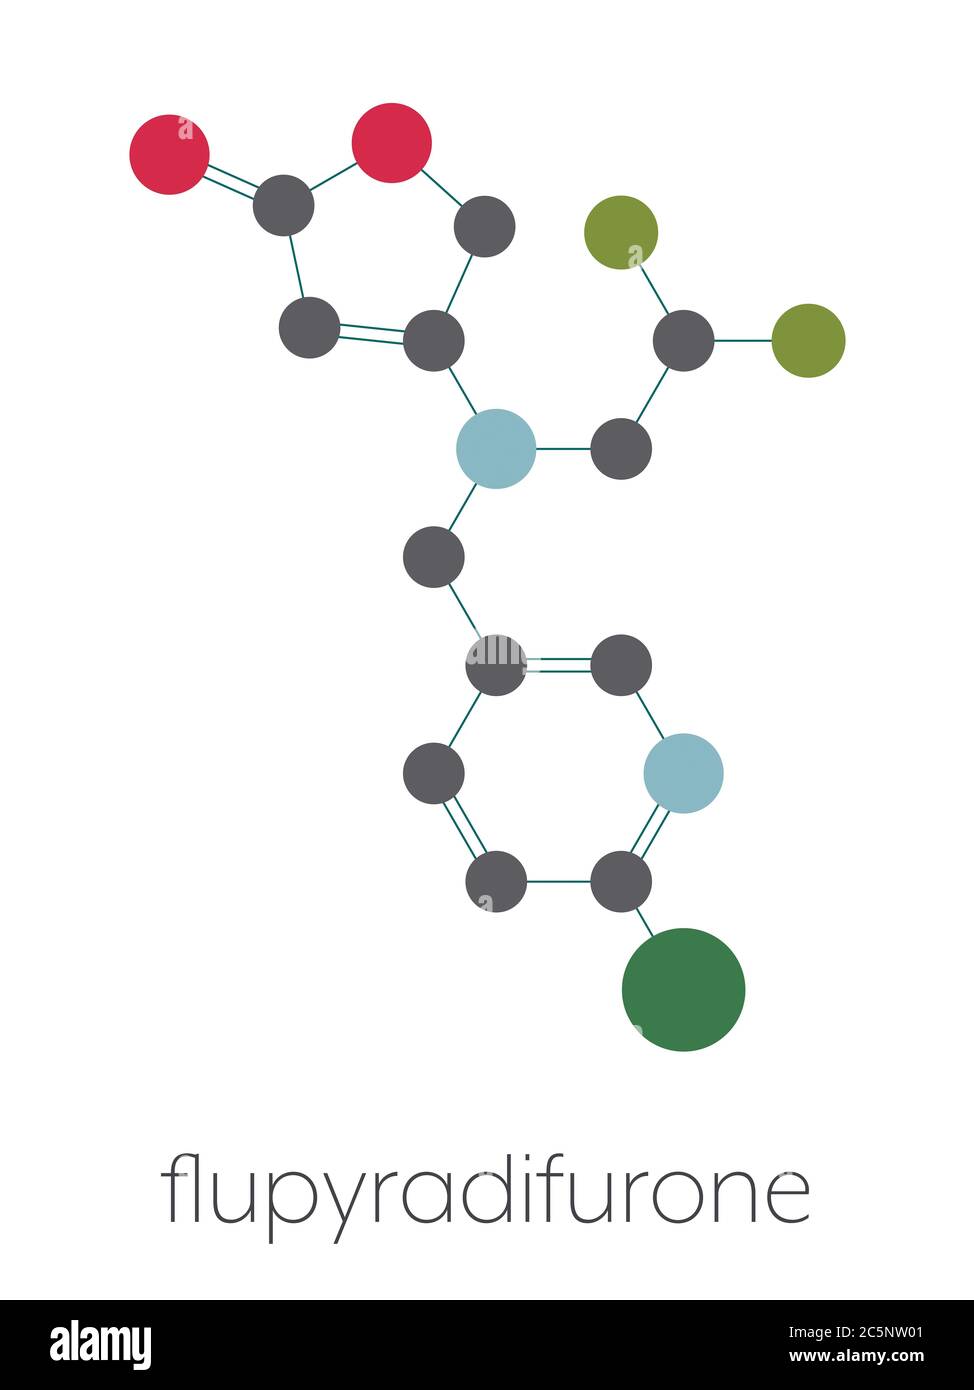 Flupyradifurone neonicotinoid insecticide molecule. Stylized skeletal formula (chemical structure): Atoms are shown as color-coded circles: hydrogen (hidden), carbon (grey), oxygen (red), nitrogen (blue), chlorine (green), fluorine (cyan). Stock Photo